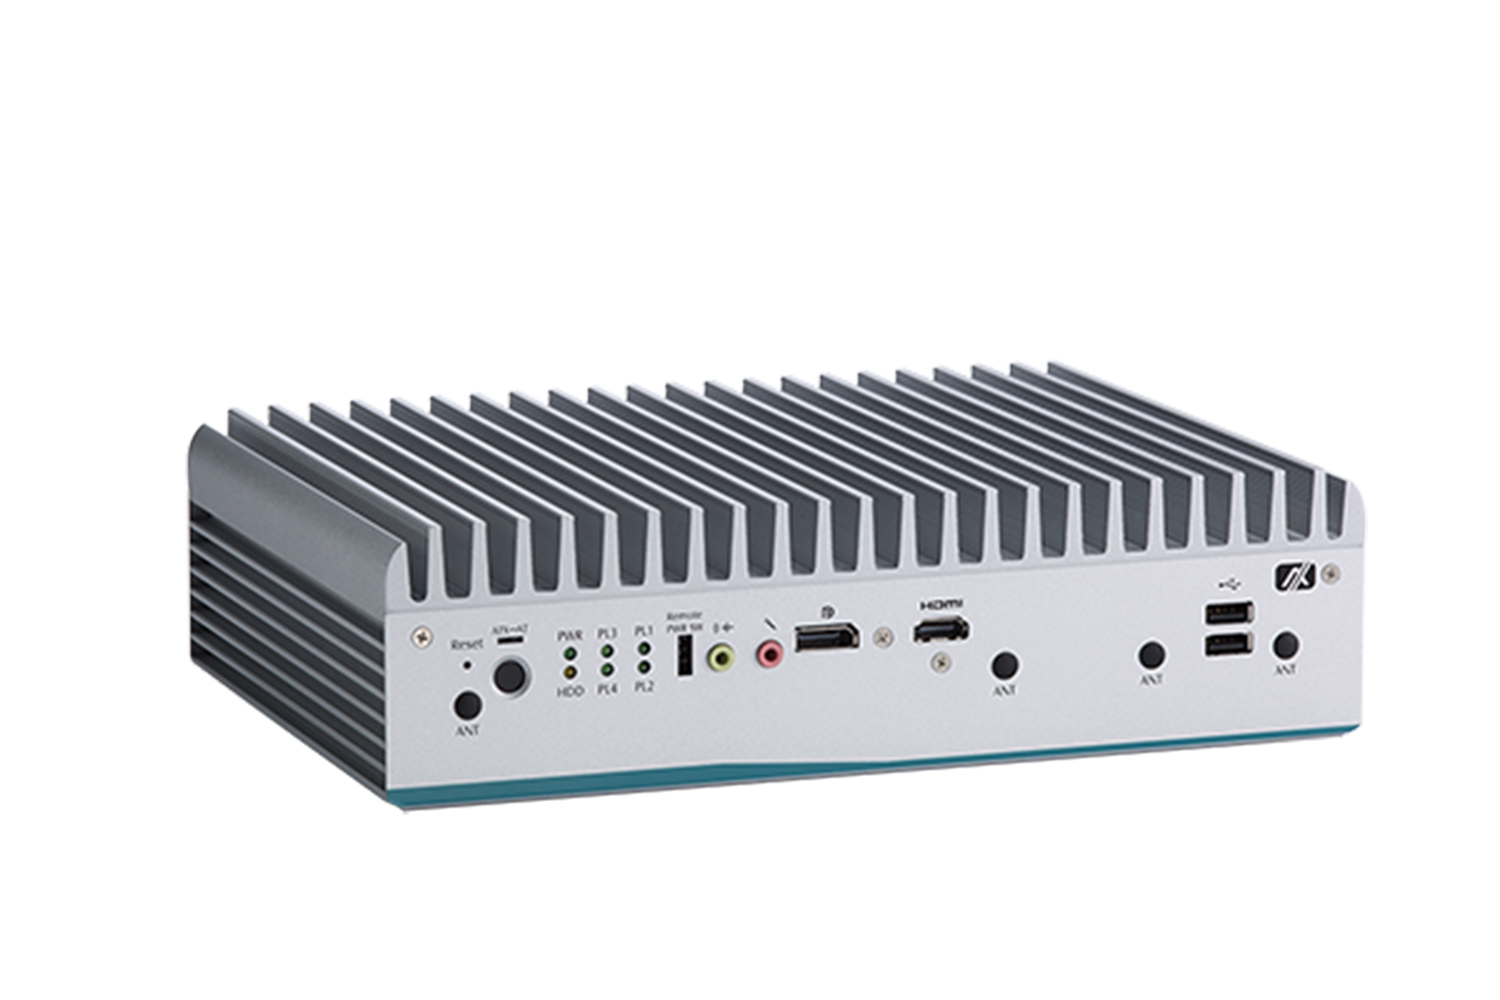 High performance Modular and Expansion Fanless Embedded System